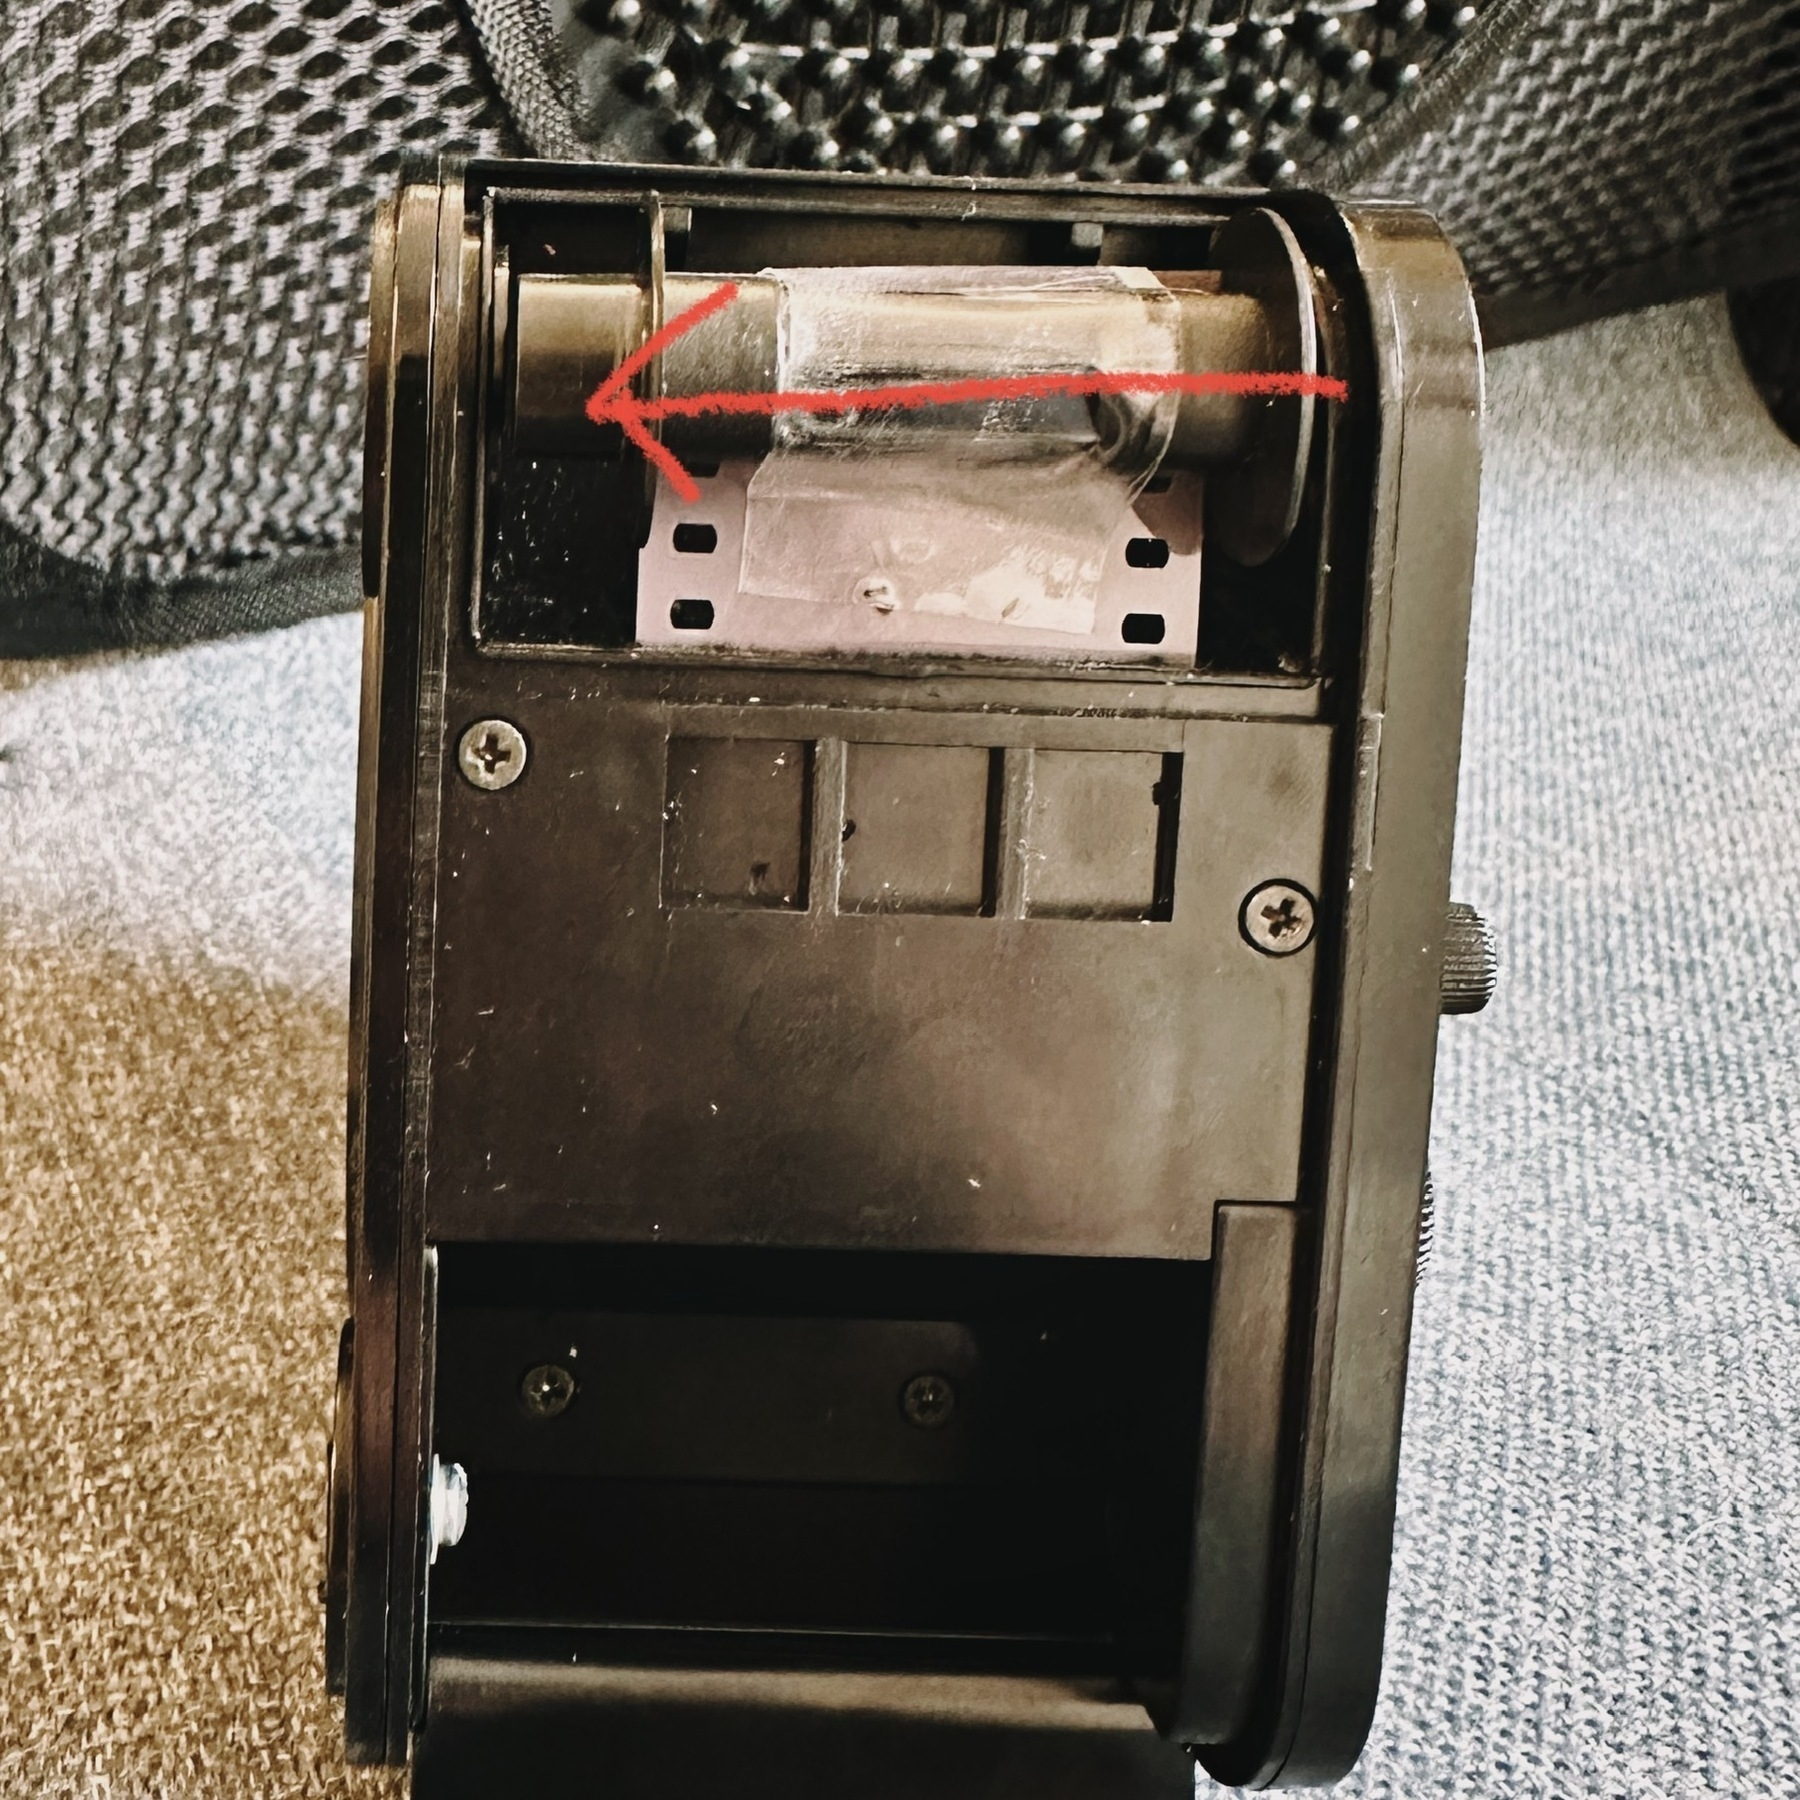 a photo of a film bulk loader showing the film coming out of the loader, with a red arrow showing the direction of the film cassette